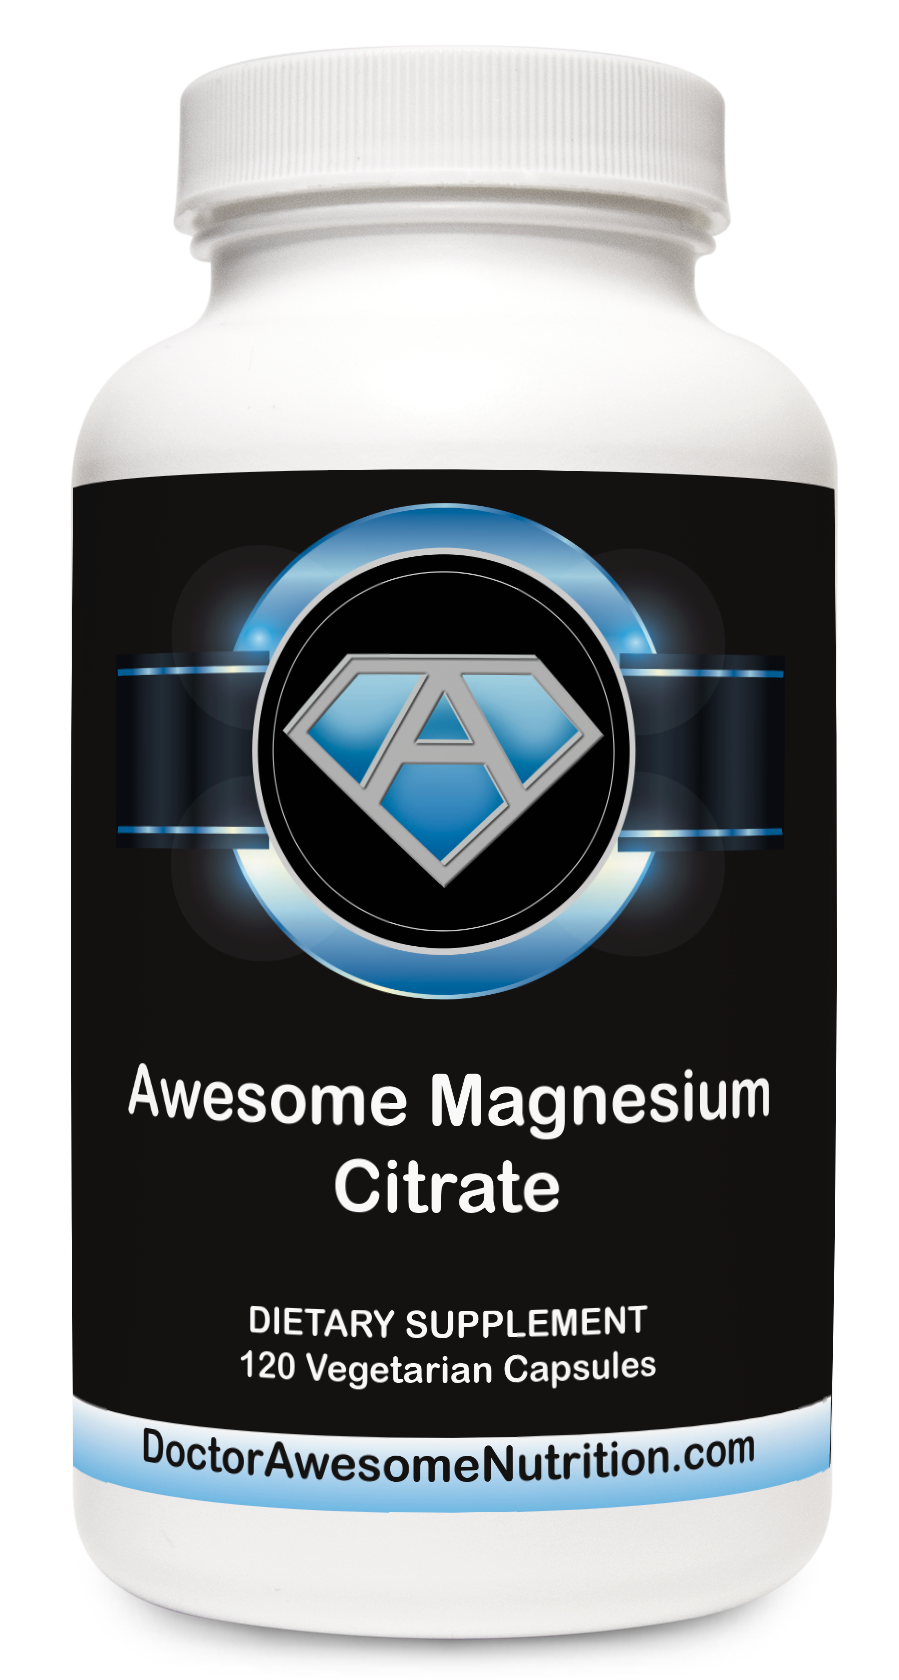 Awesome Magnesium Citrate